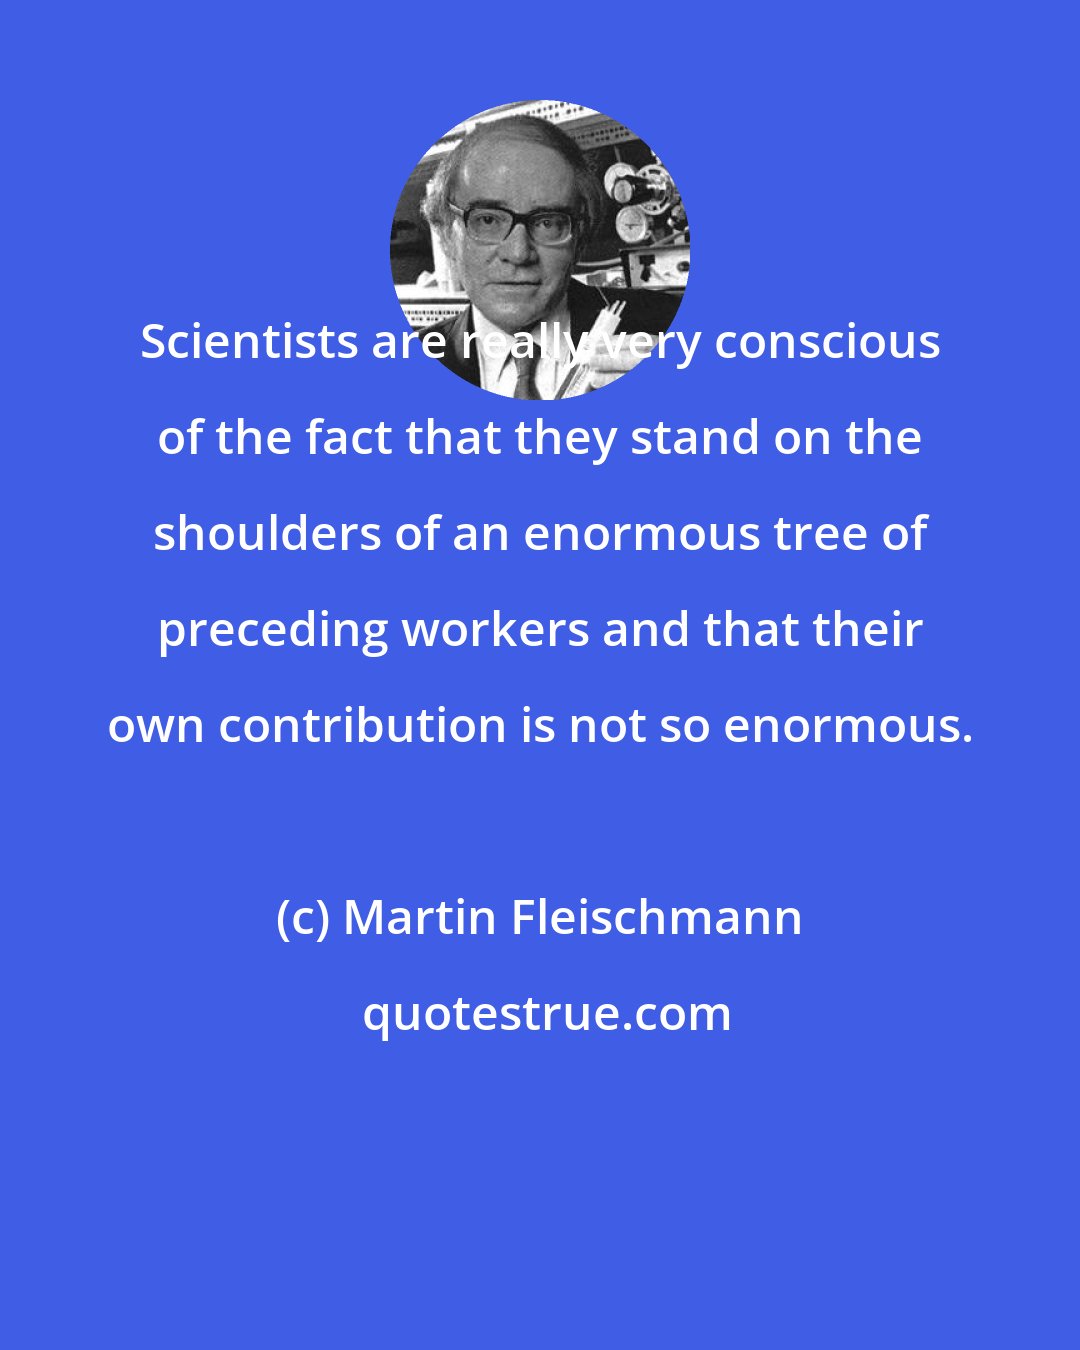 Martin Fleischmann: Scientists are really very conscious of the fact that they stand on the shoulders of an enormous tree of preceding workers and that their own contribution is not so enormous.